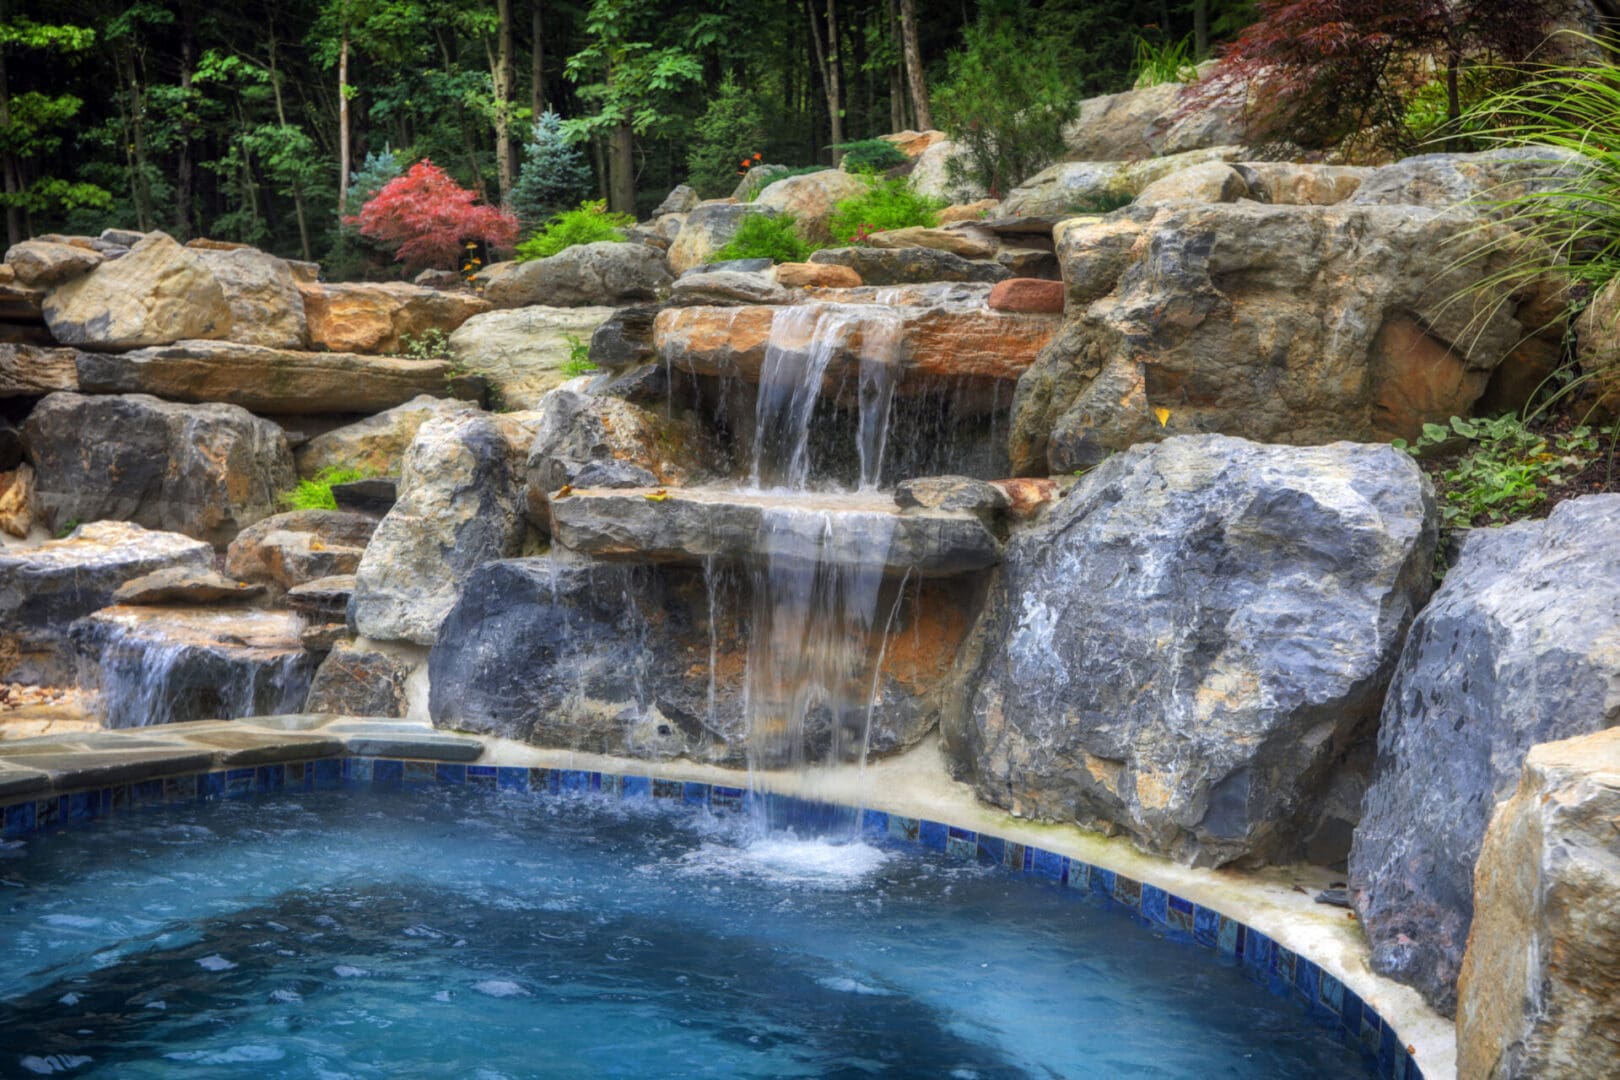 A pool with a waterfall, featuring water elements and surrounded by rocks.